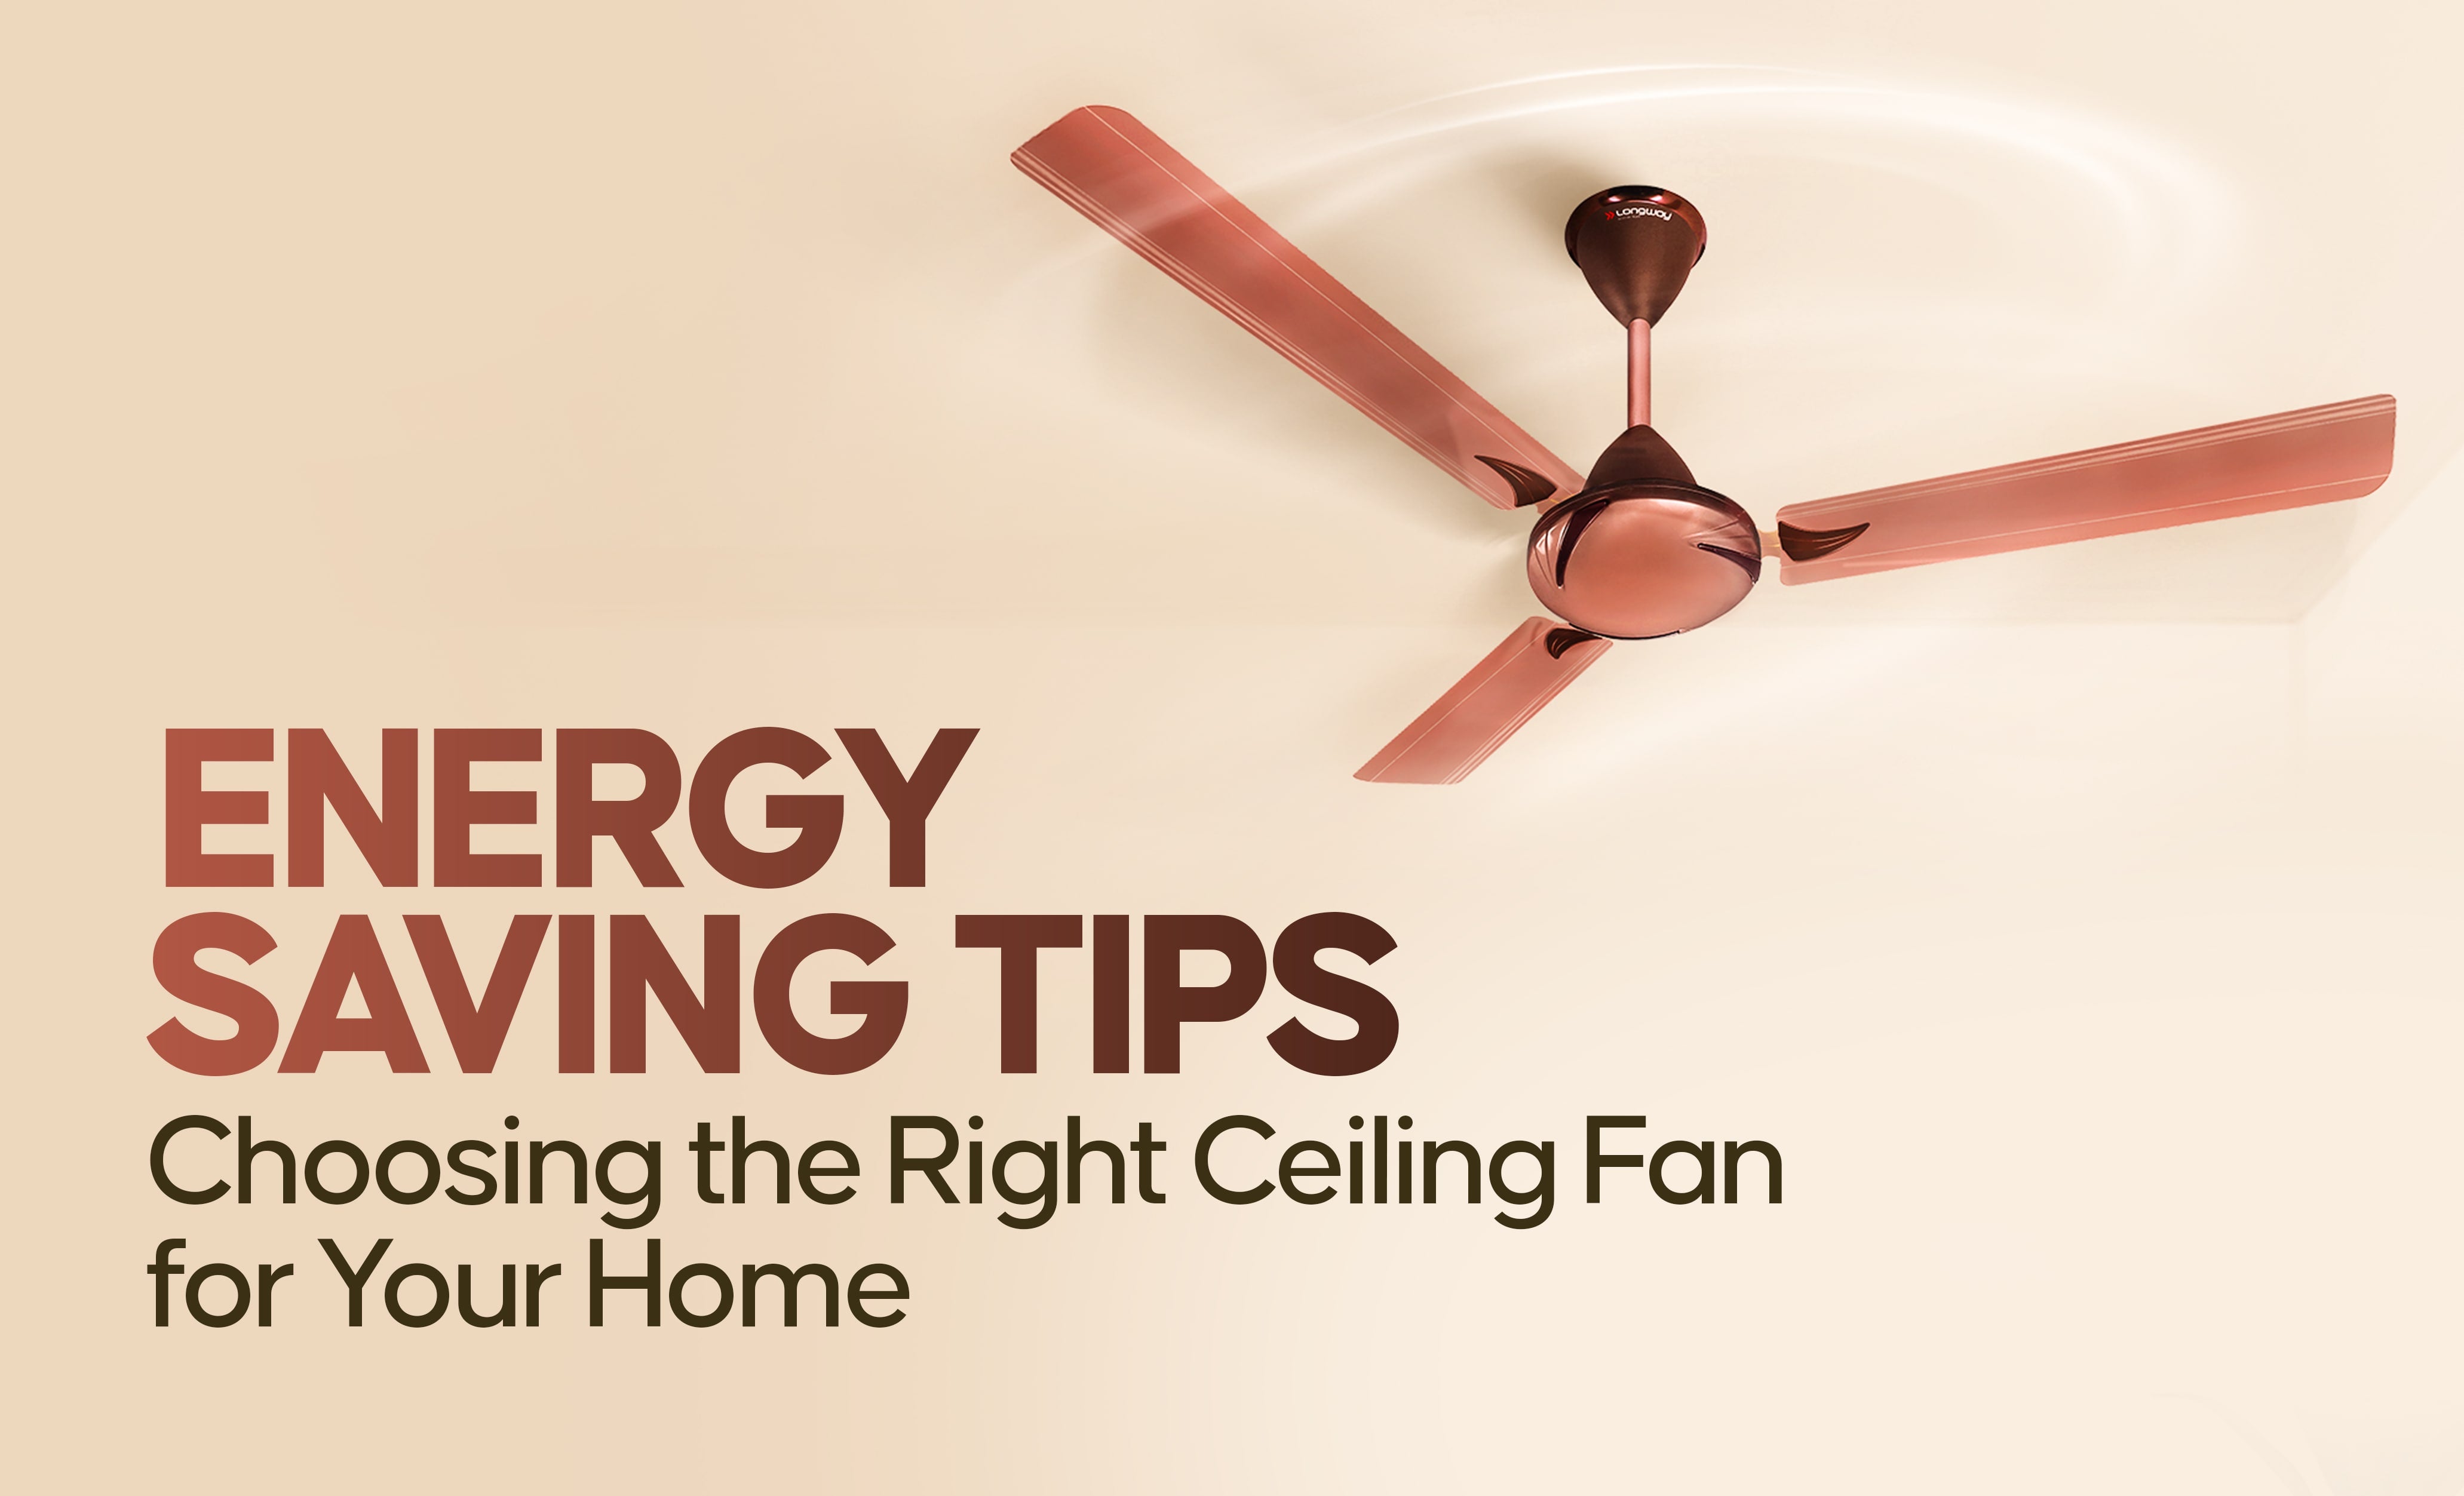 Energy-Saving Tips Choosing the Right Ceiling Fan for Your Home